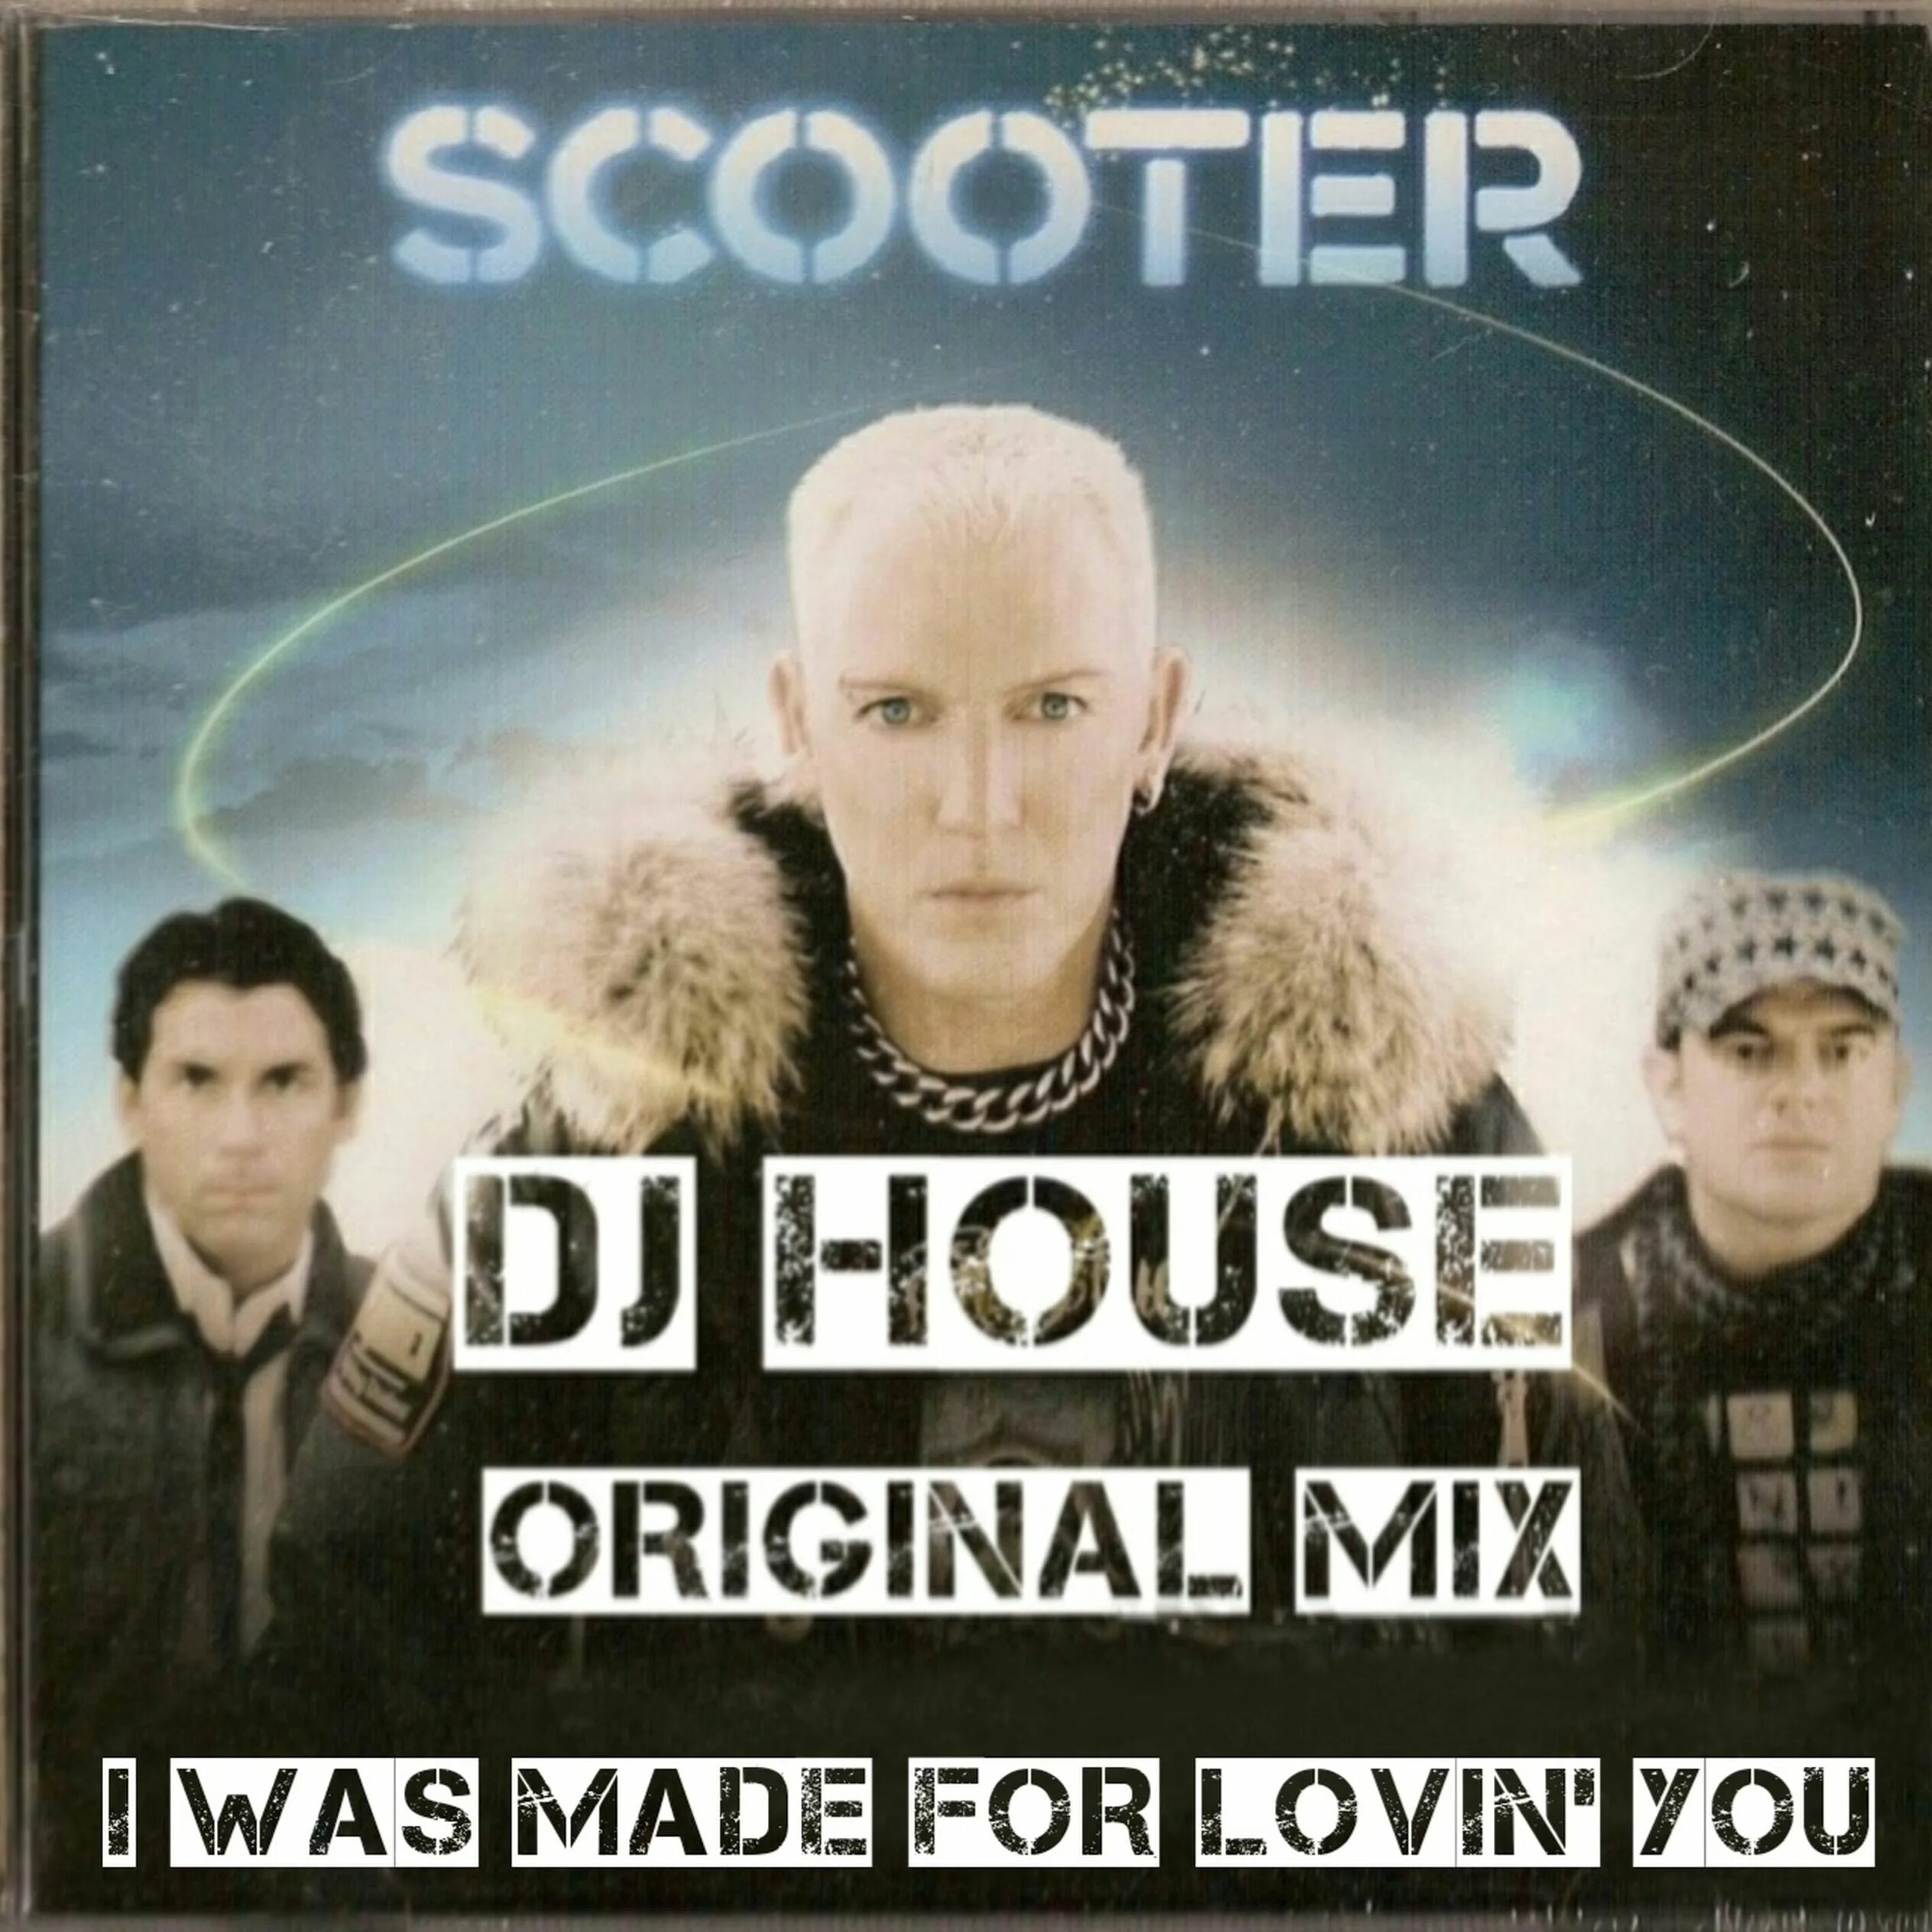 Scooter i was made for loving you Baby. I was made for Lovin' you. Scooter - i was made for Lovin' you обложка альбома. Acid House Scooter.